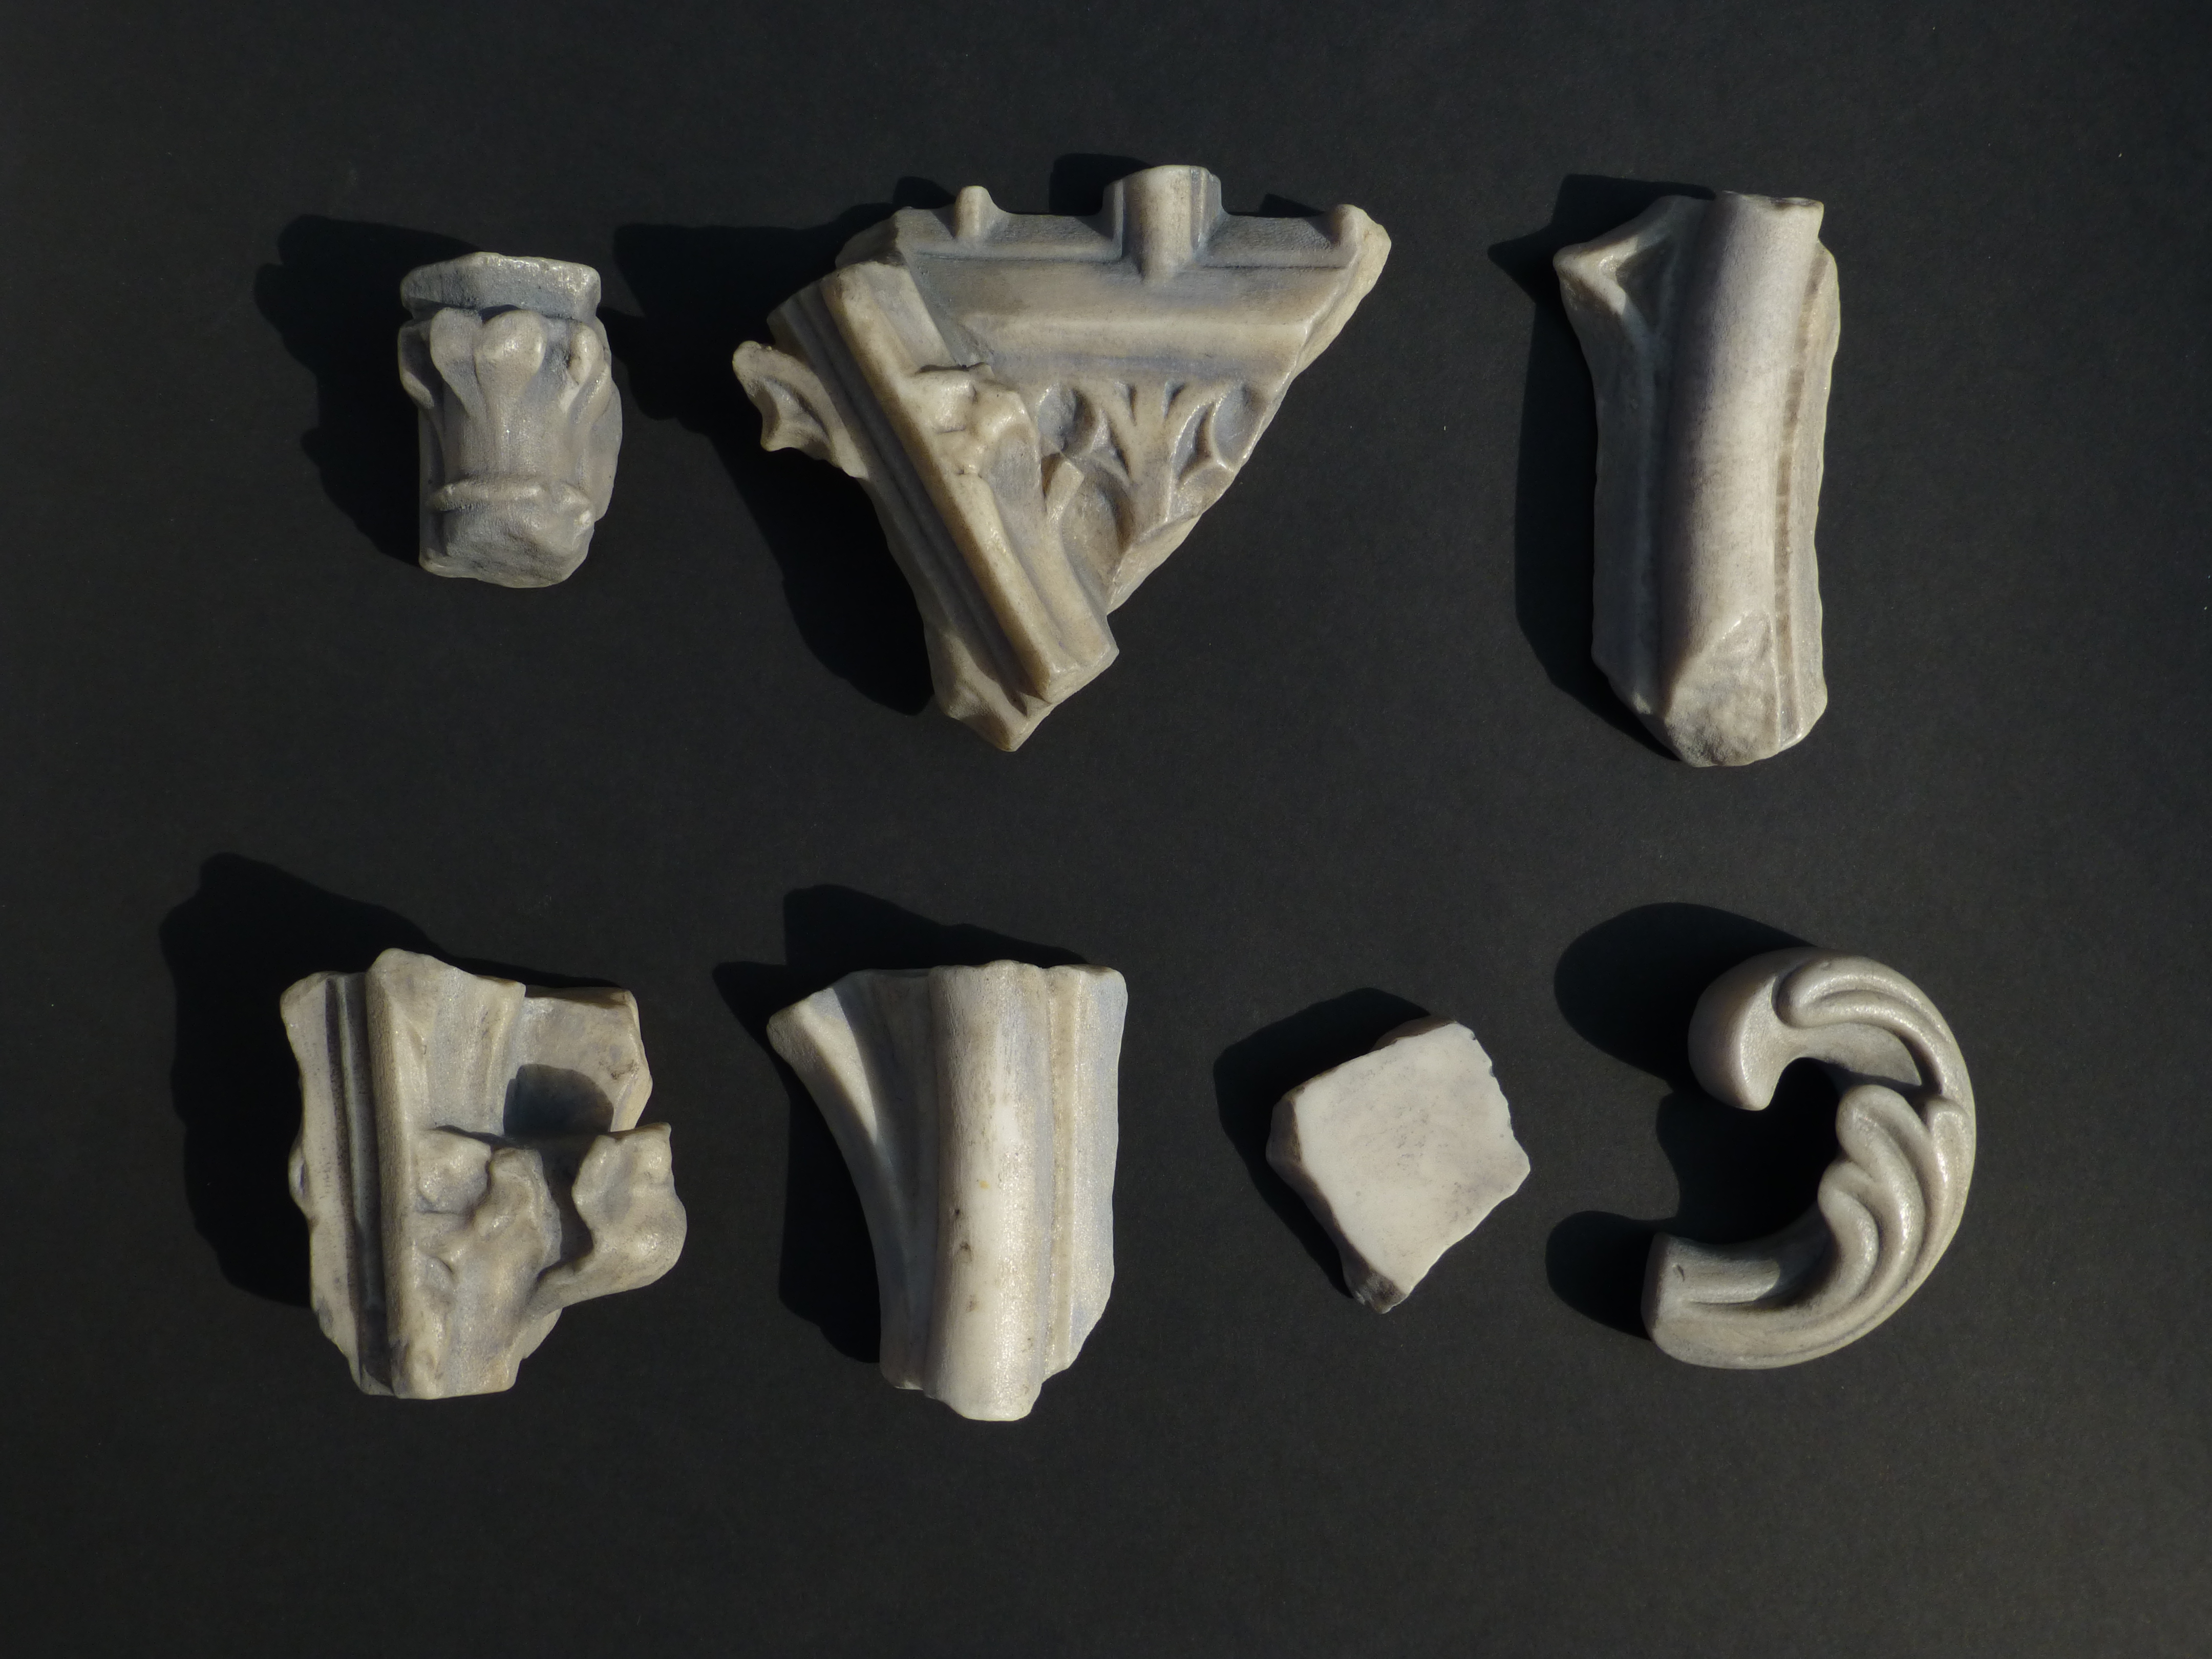 Original fragments from Robert the Bruce's tomb. Pic credit: CDDV a partnership between Historic Environment Scotland and the Glasgow School of Art’ Tomb.